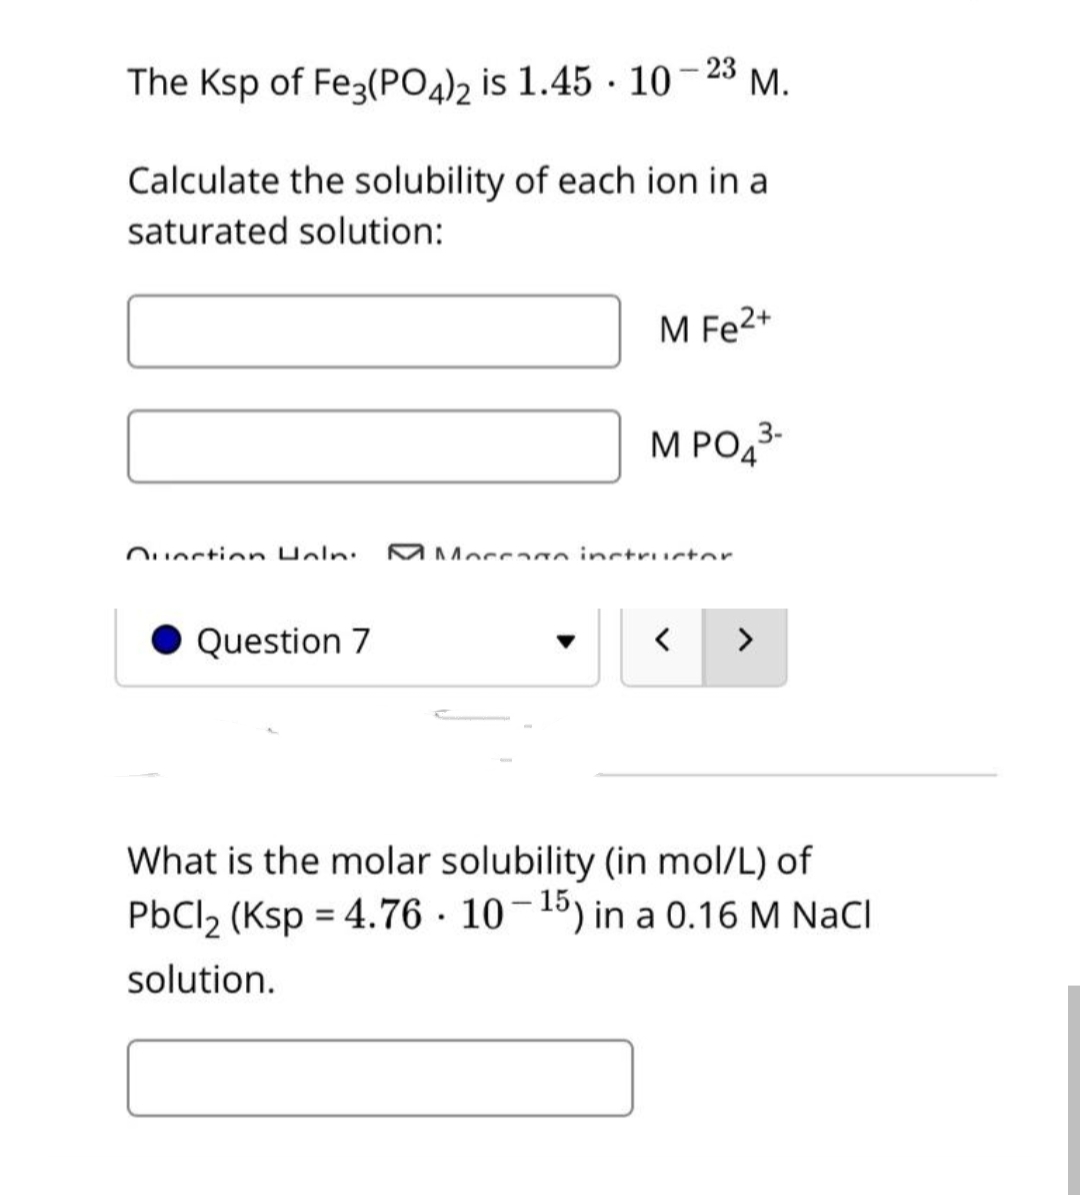 М.
The Ksp of Fe3(PO4), is 1.45 · 10-23 M.
Calculate the solubility of each ion in a
saturated solution:
M Fe2+
M PO43-
Quection Uoln:
MMocc o inctructor
Question 7
>
What is the molar solubility (in mol/L) of
PbCl2 (Ksp = 4.76 · 10-15) in a 0.16 M NaCl
solution.
